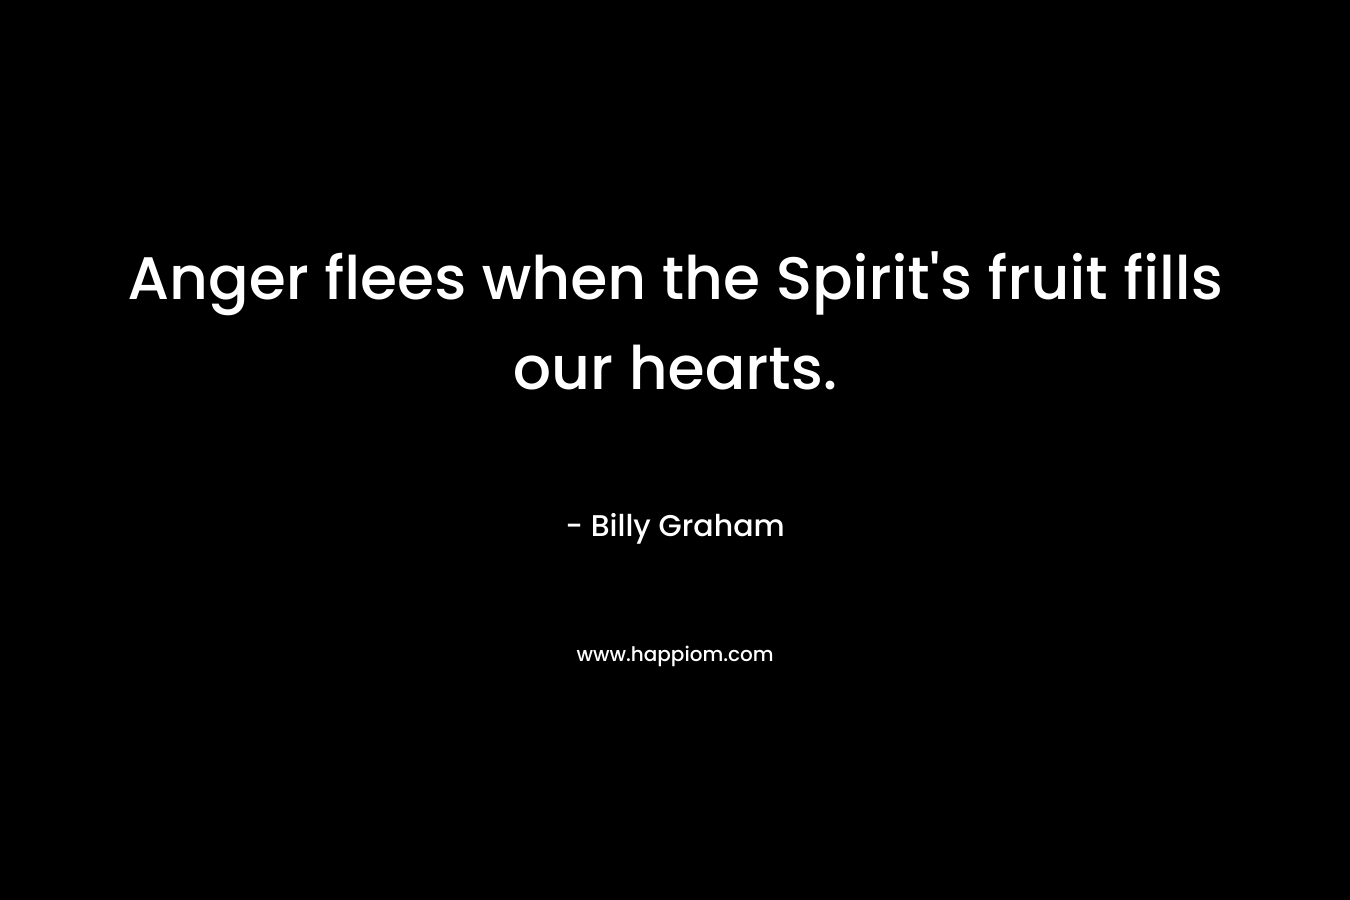 Anger flees when the Spirit's fruit fills our hearts.